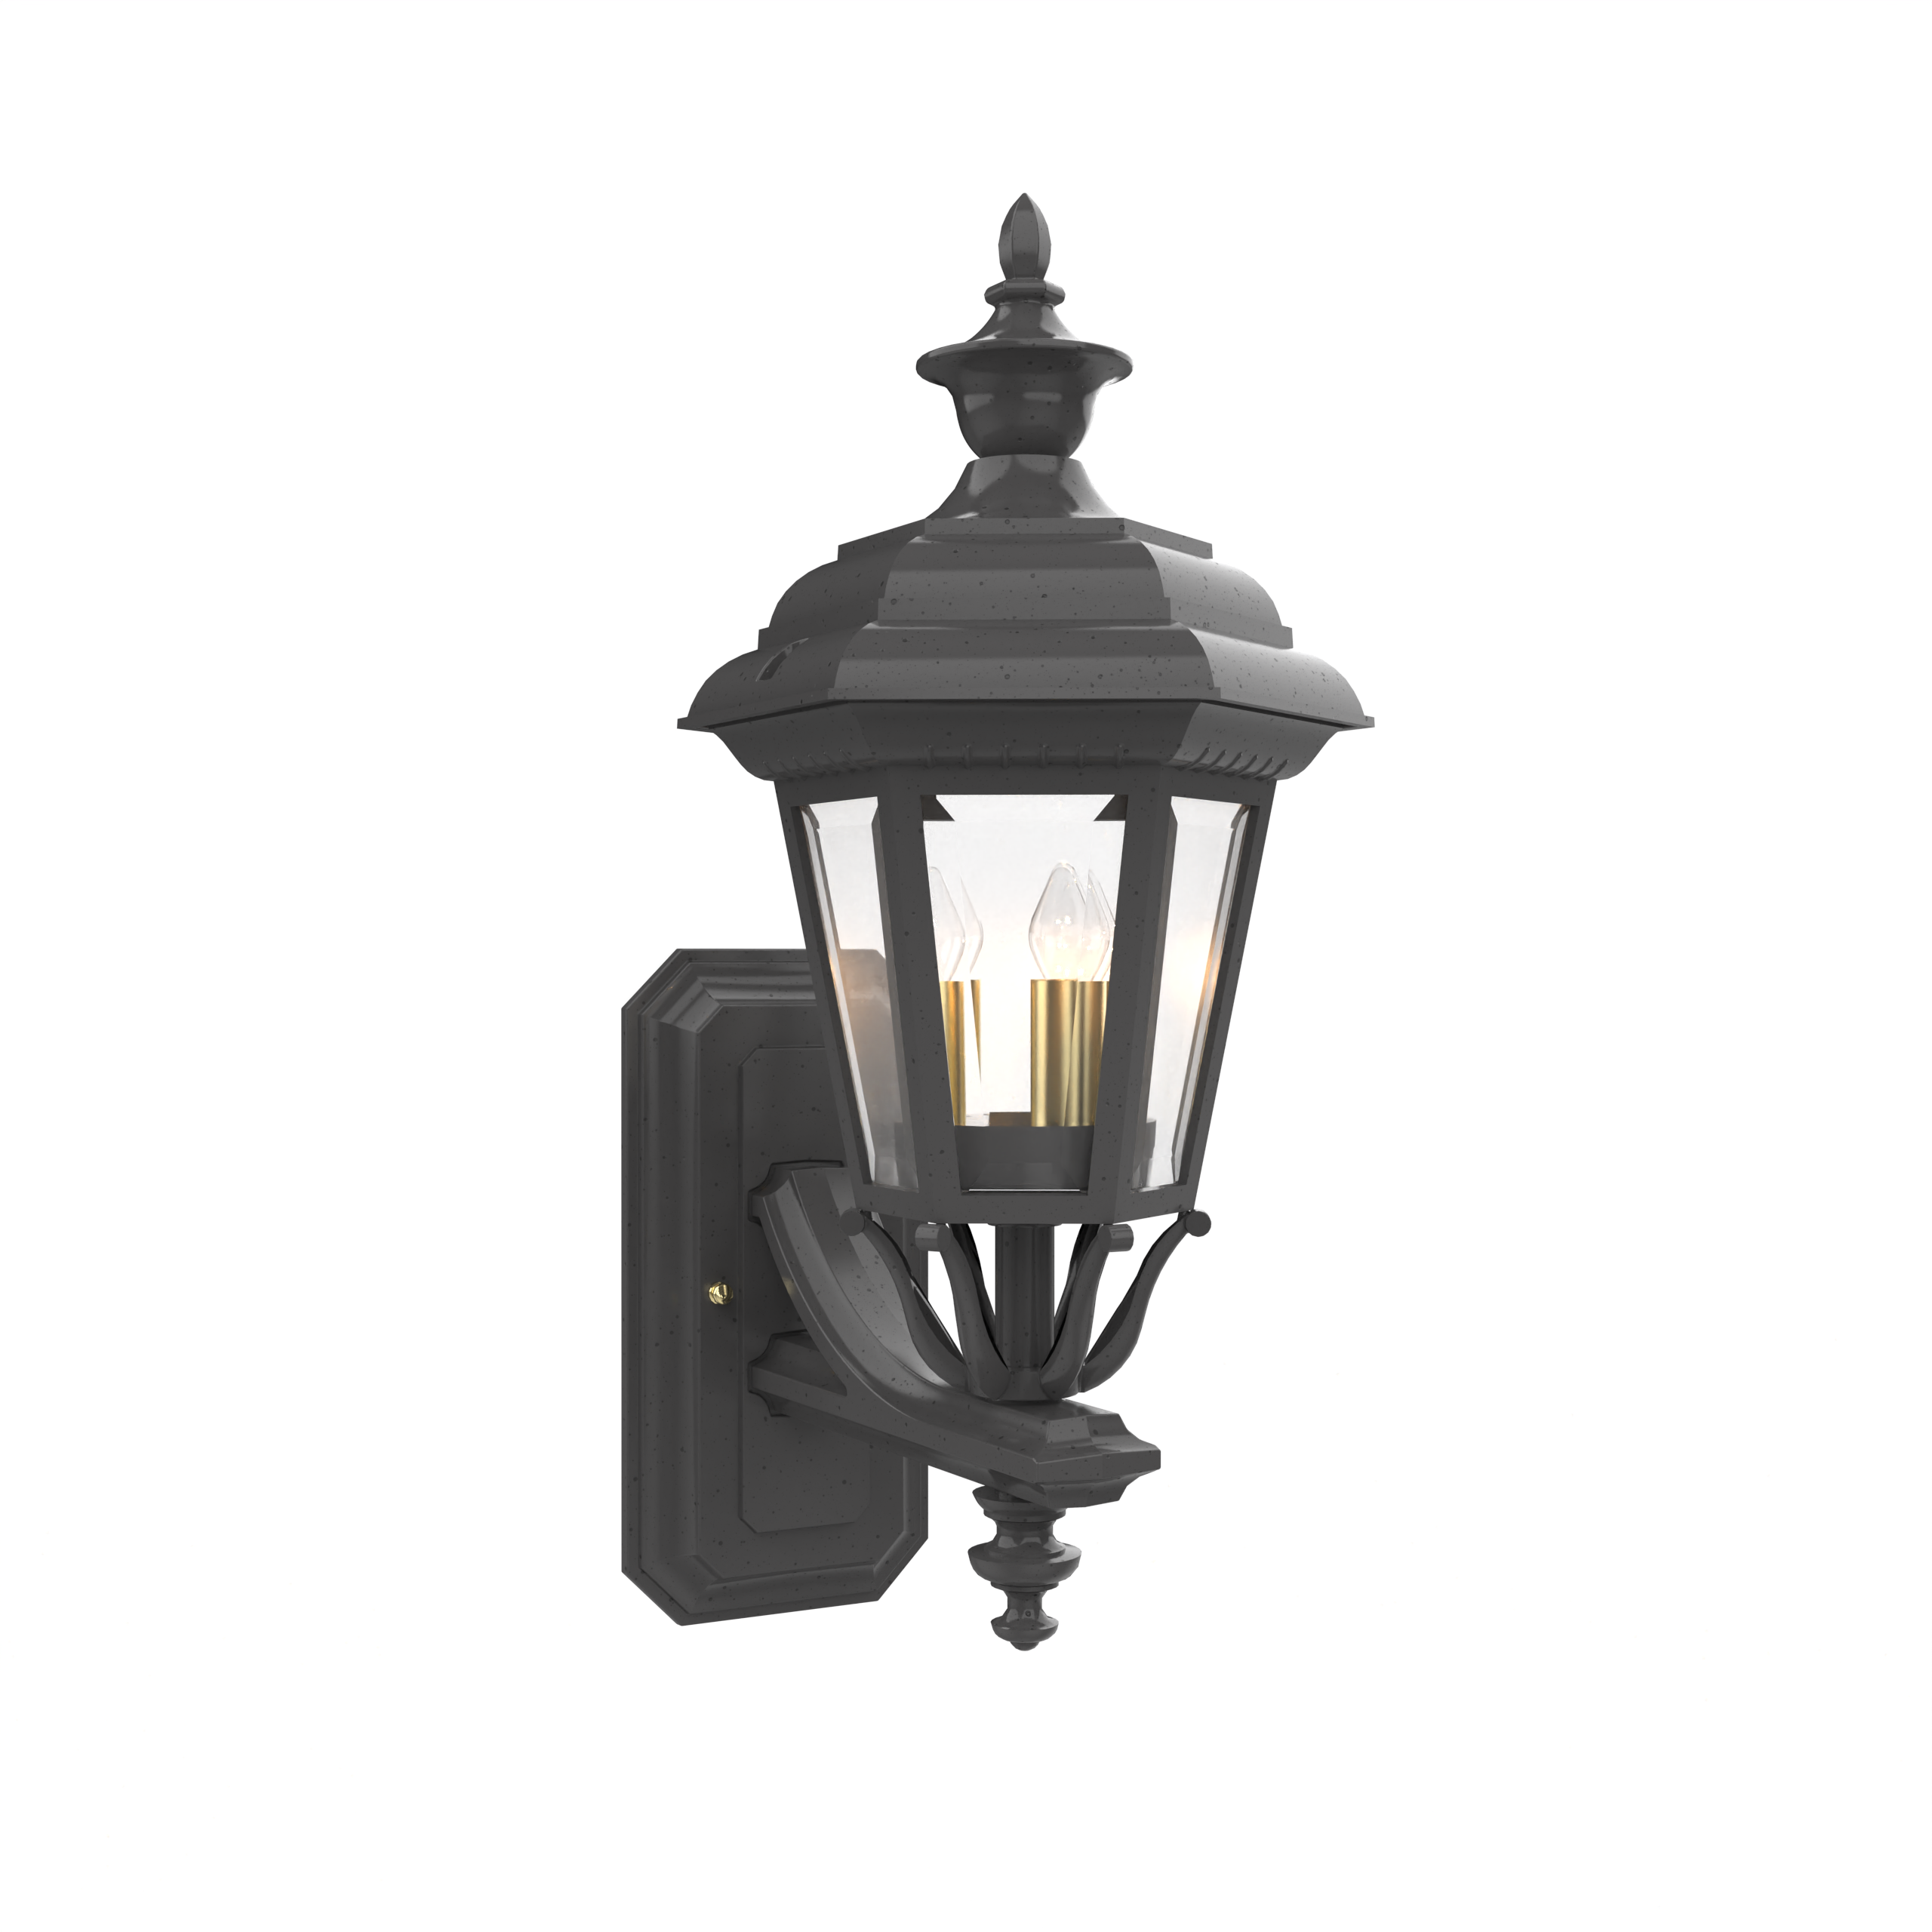 Jamestown - Uplight Wall Mount with Small Finial - 11412